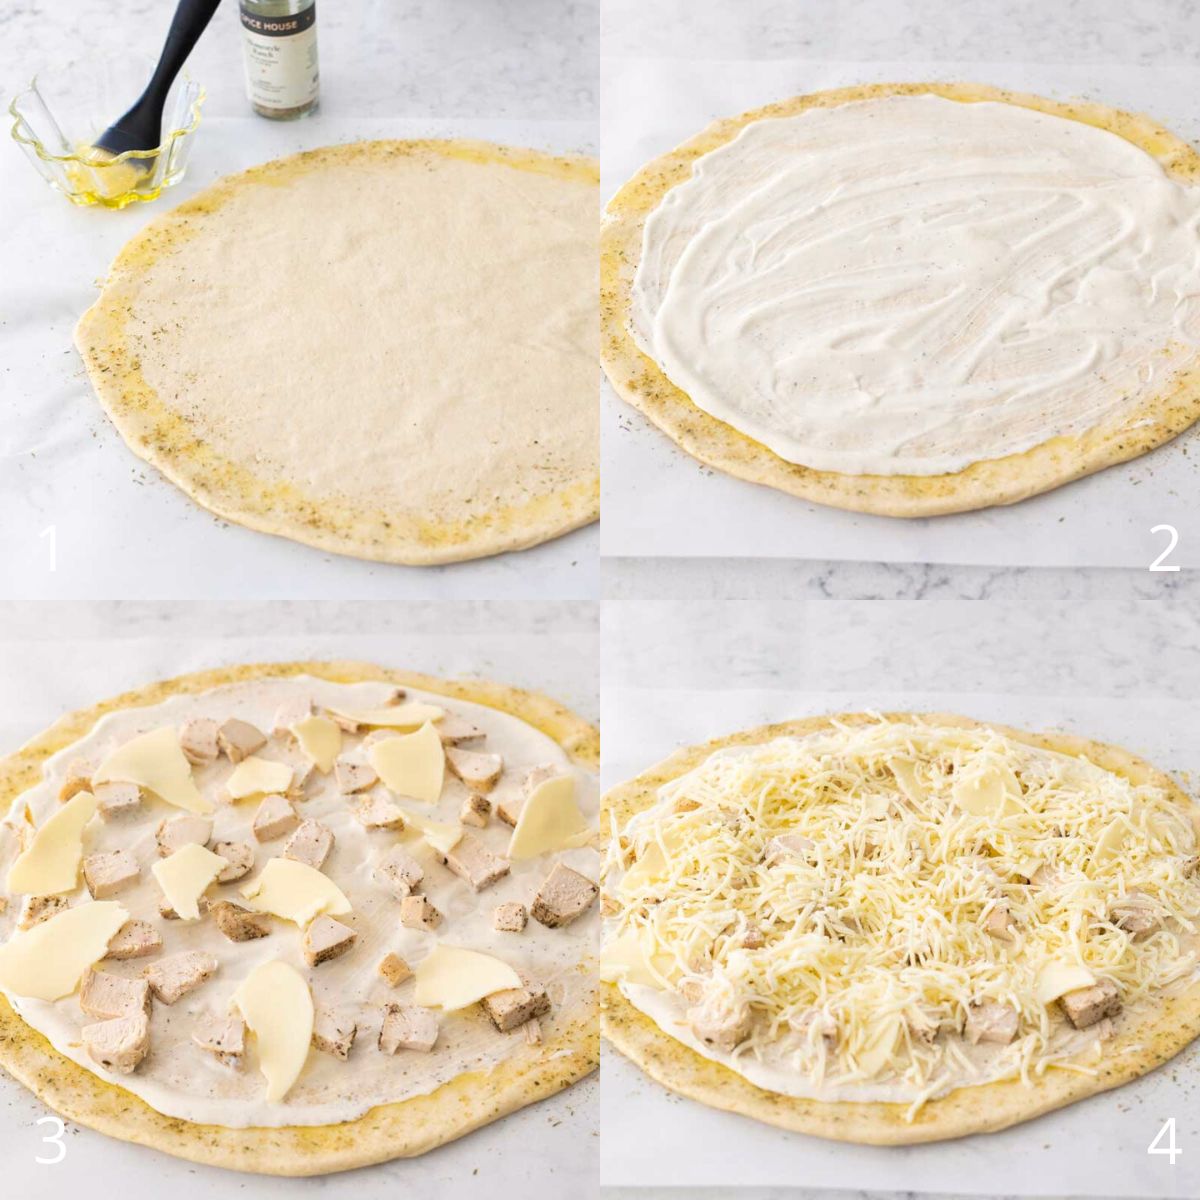 The step by step photos show how to top the pizza.